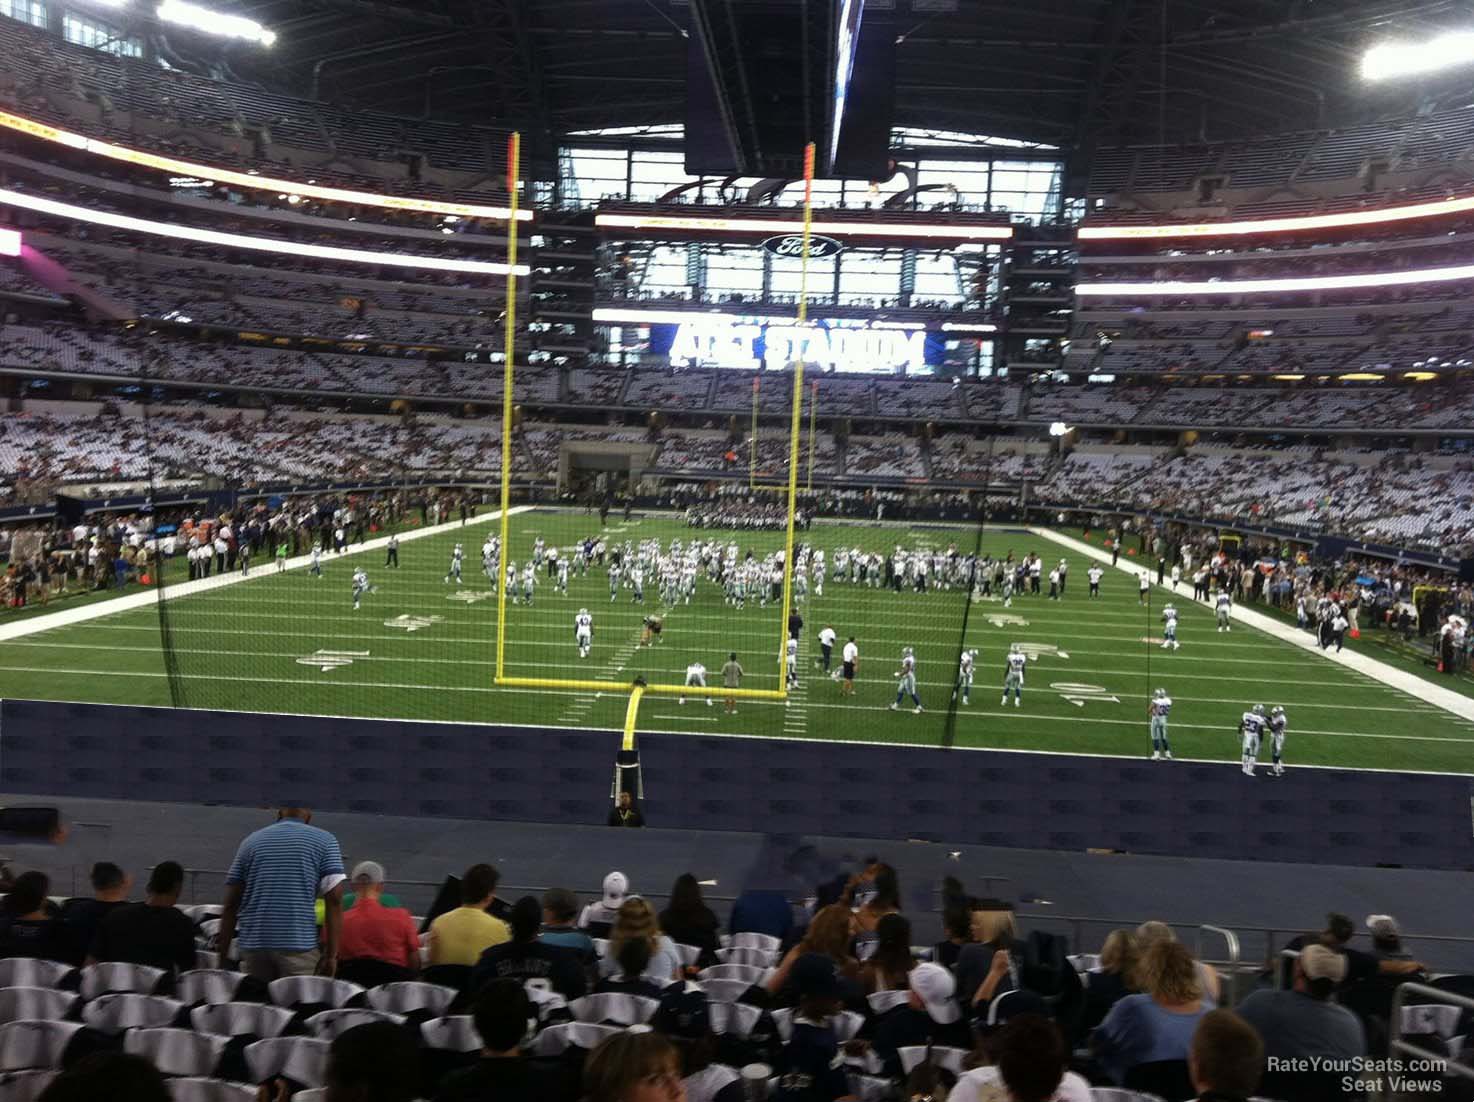 section 123, row 20 seat view  for football - at&t stadium (cowboys stadium)